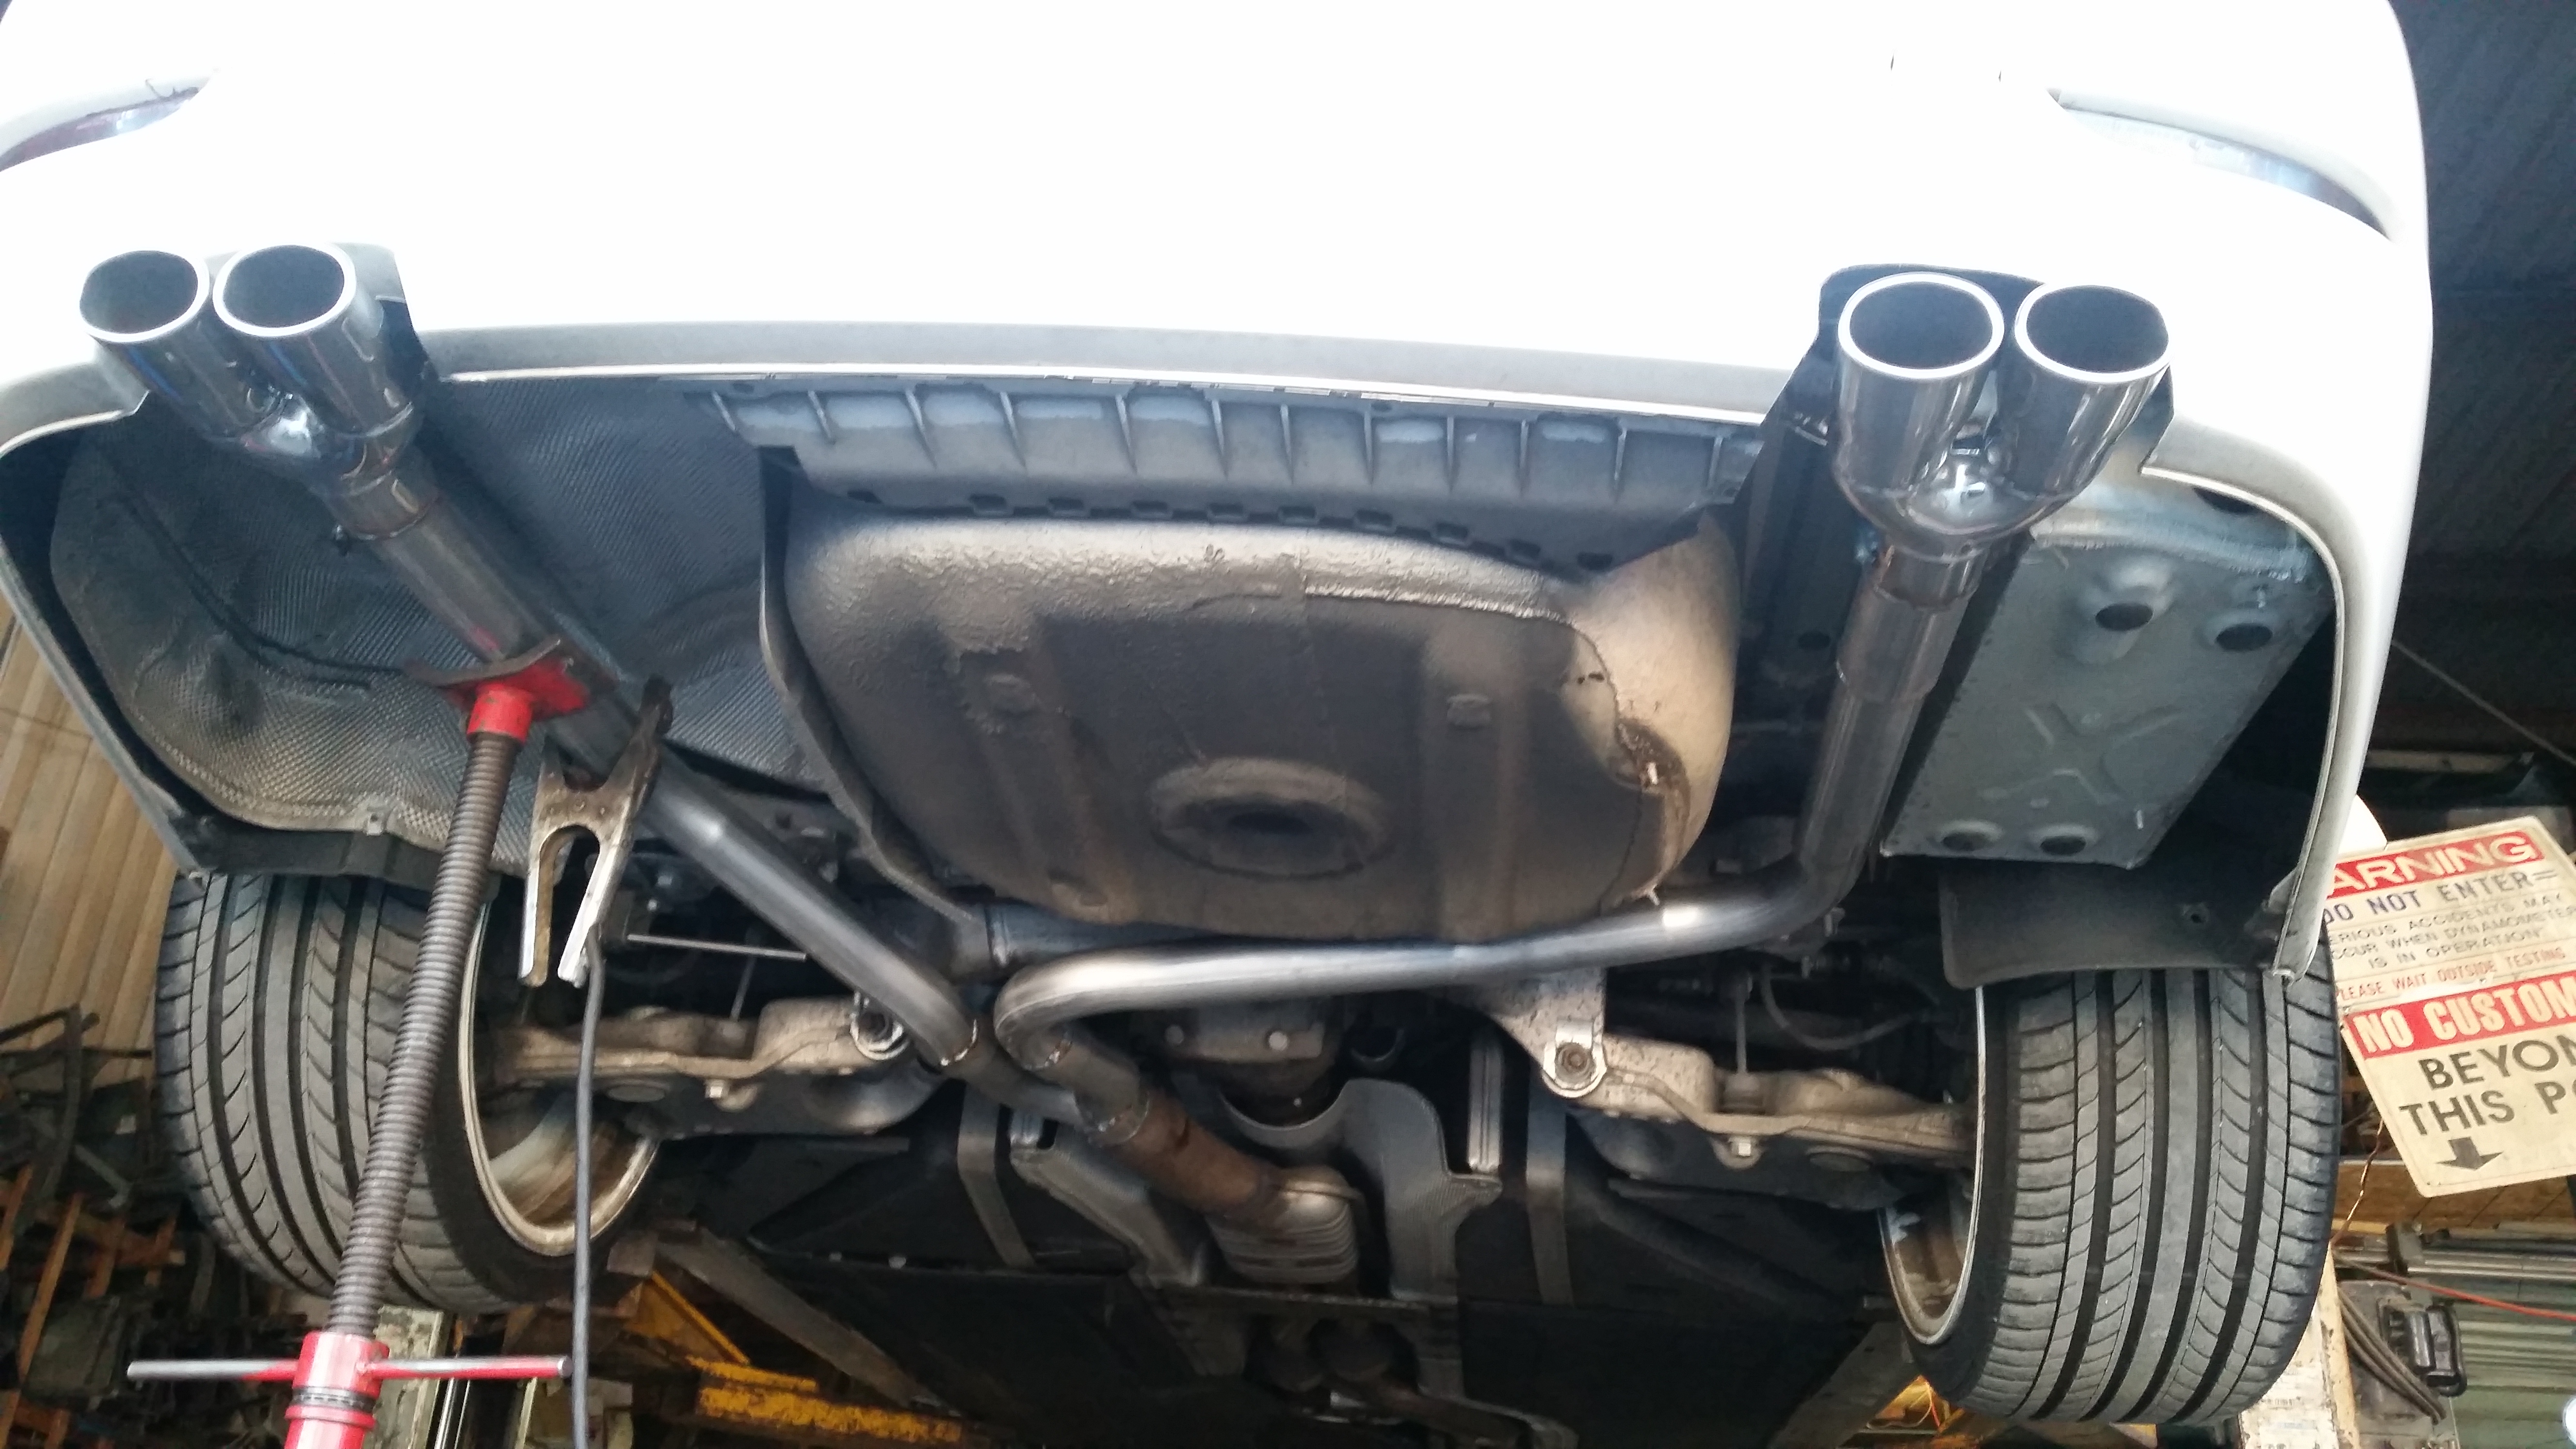 Dual straight pipe exhaust pipes on 535i - 5Series.net - Forums